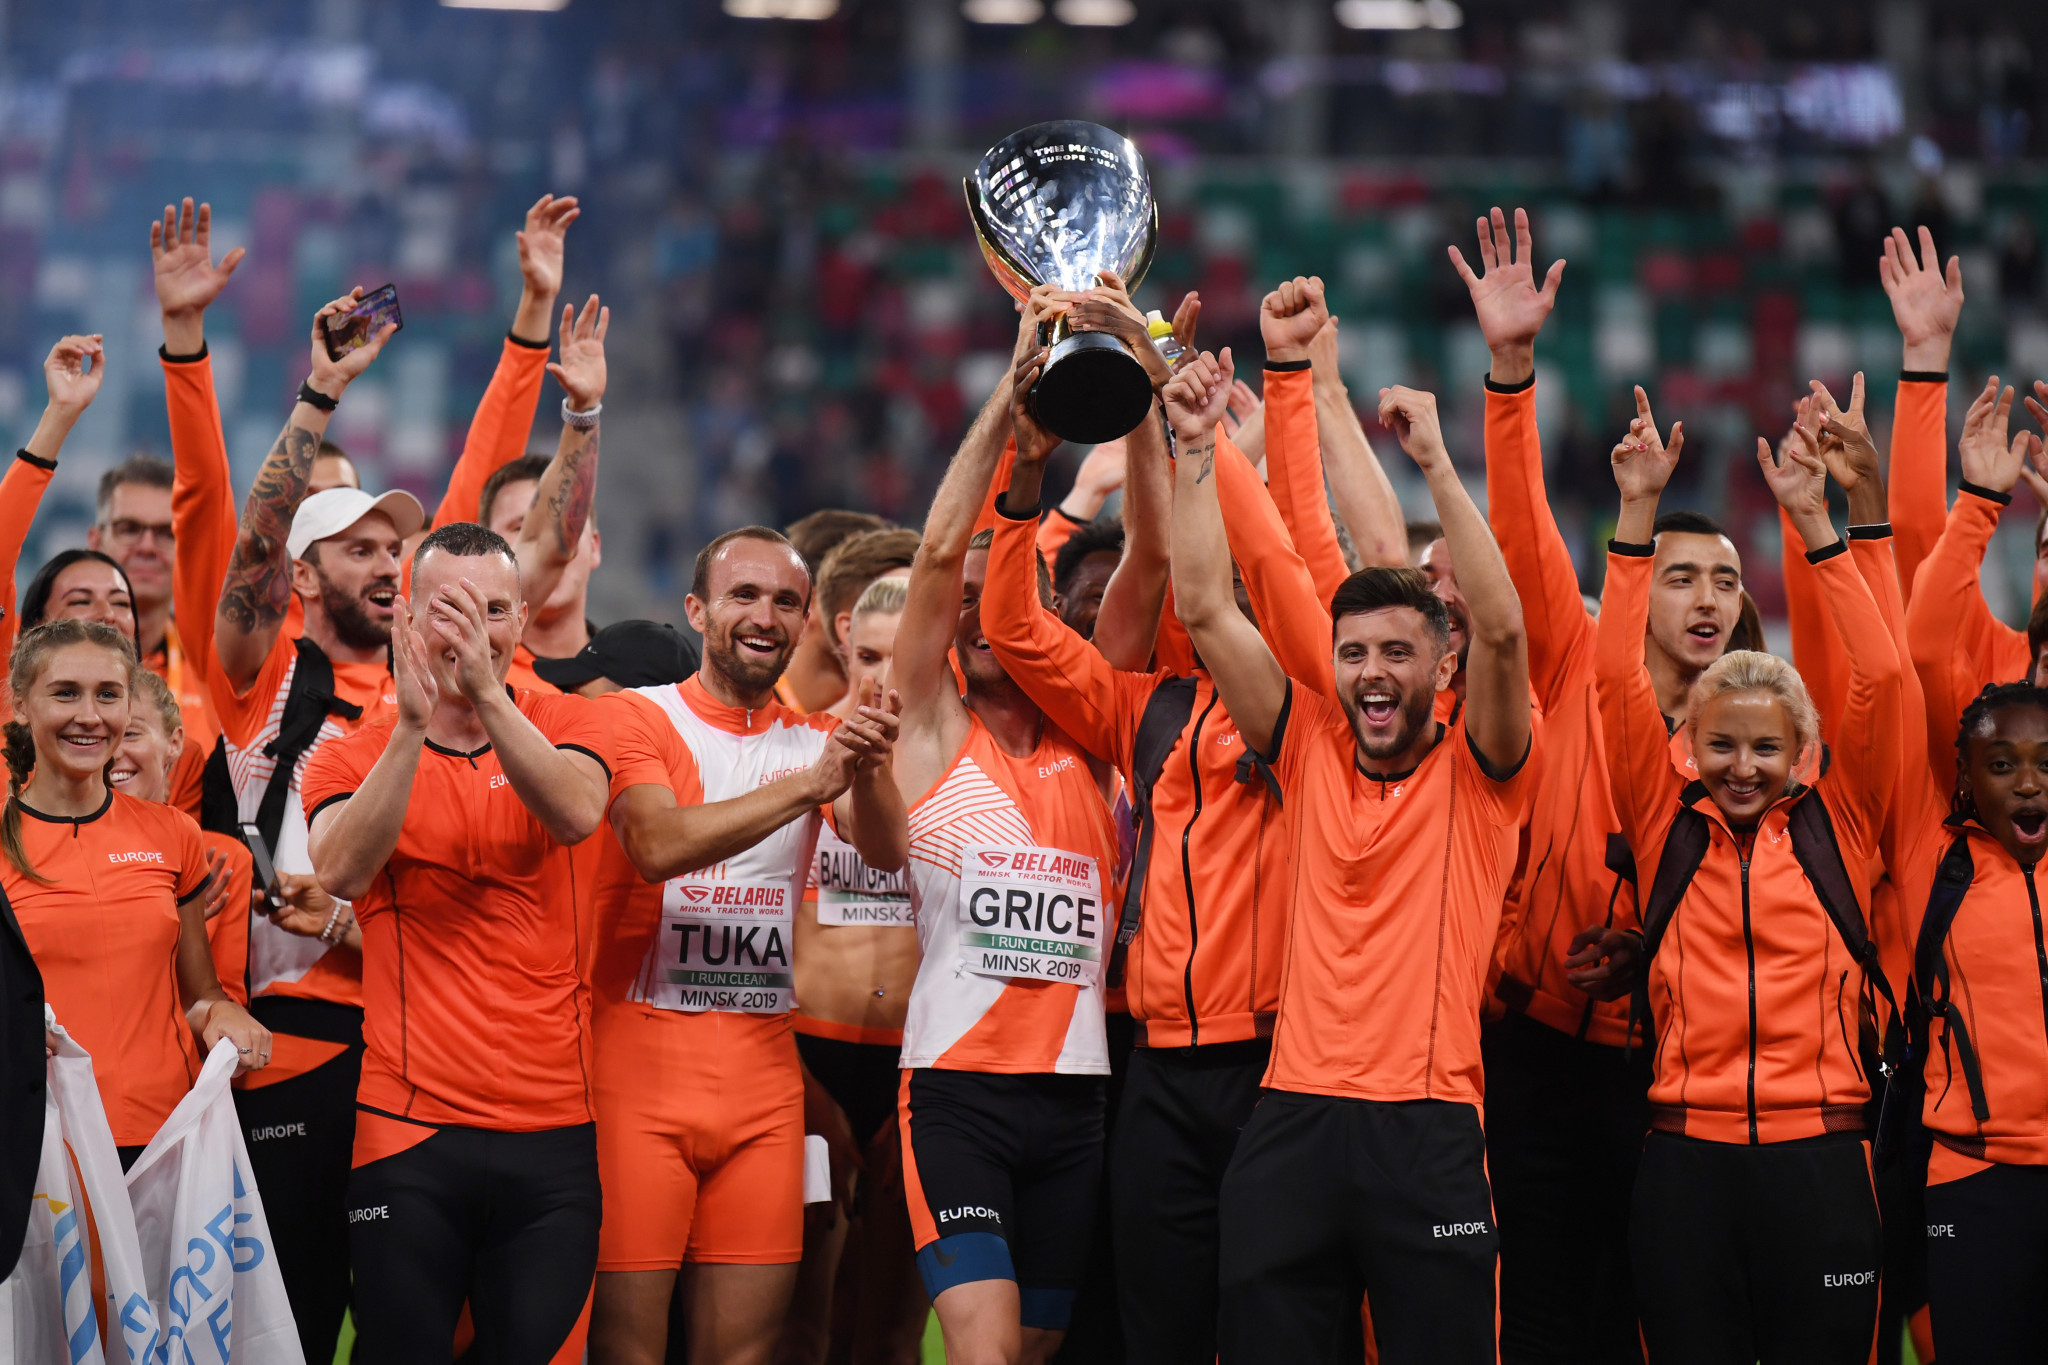 Europe seal triumph over USA at inaugural The Match athletics event